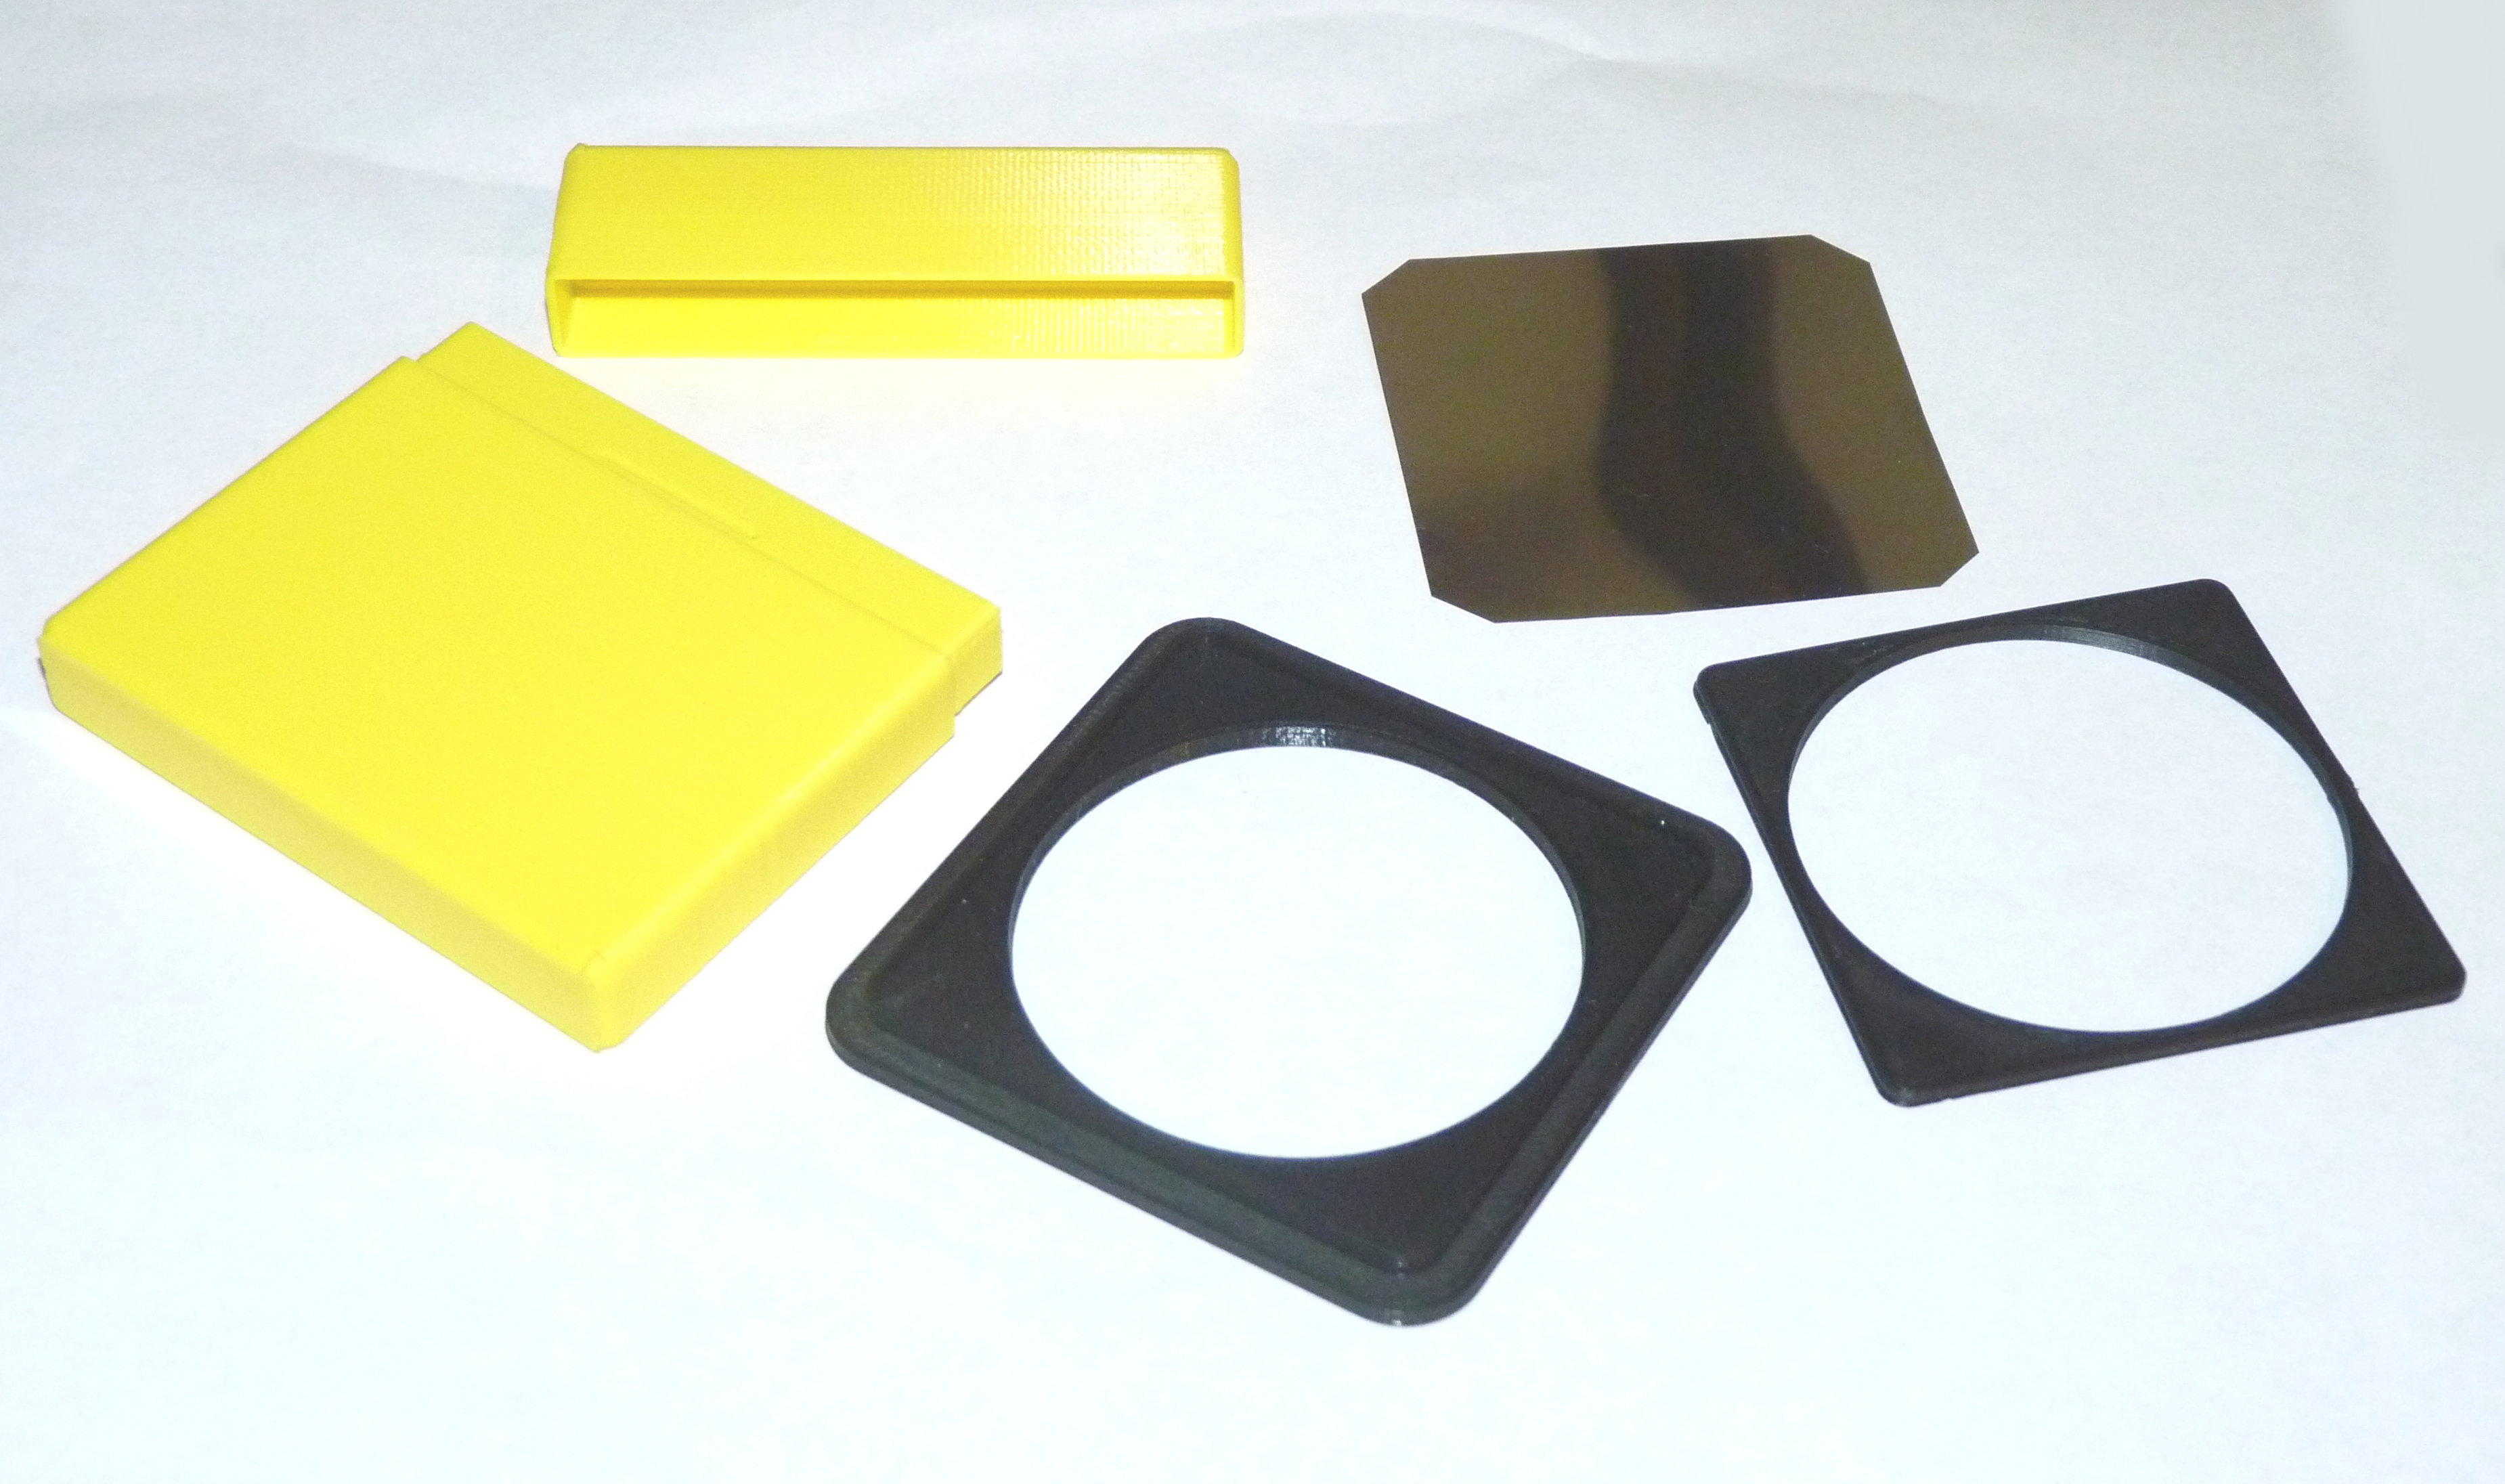 Cokin Series "A" filter film holder with box